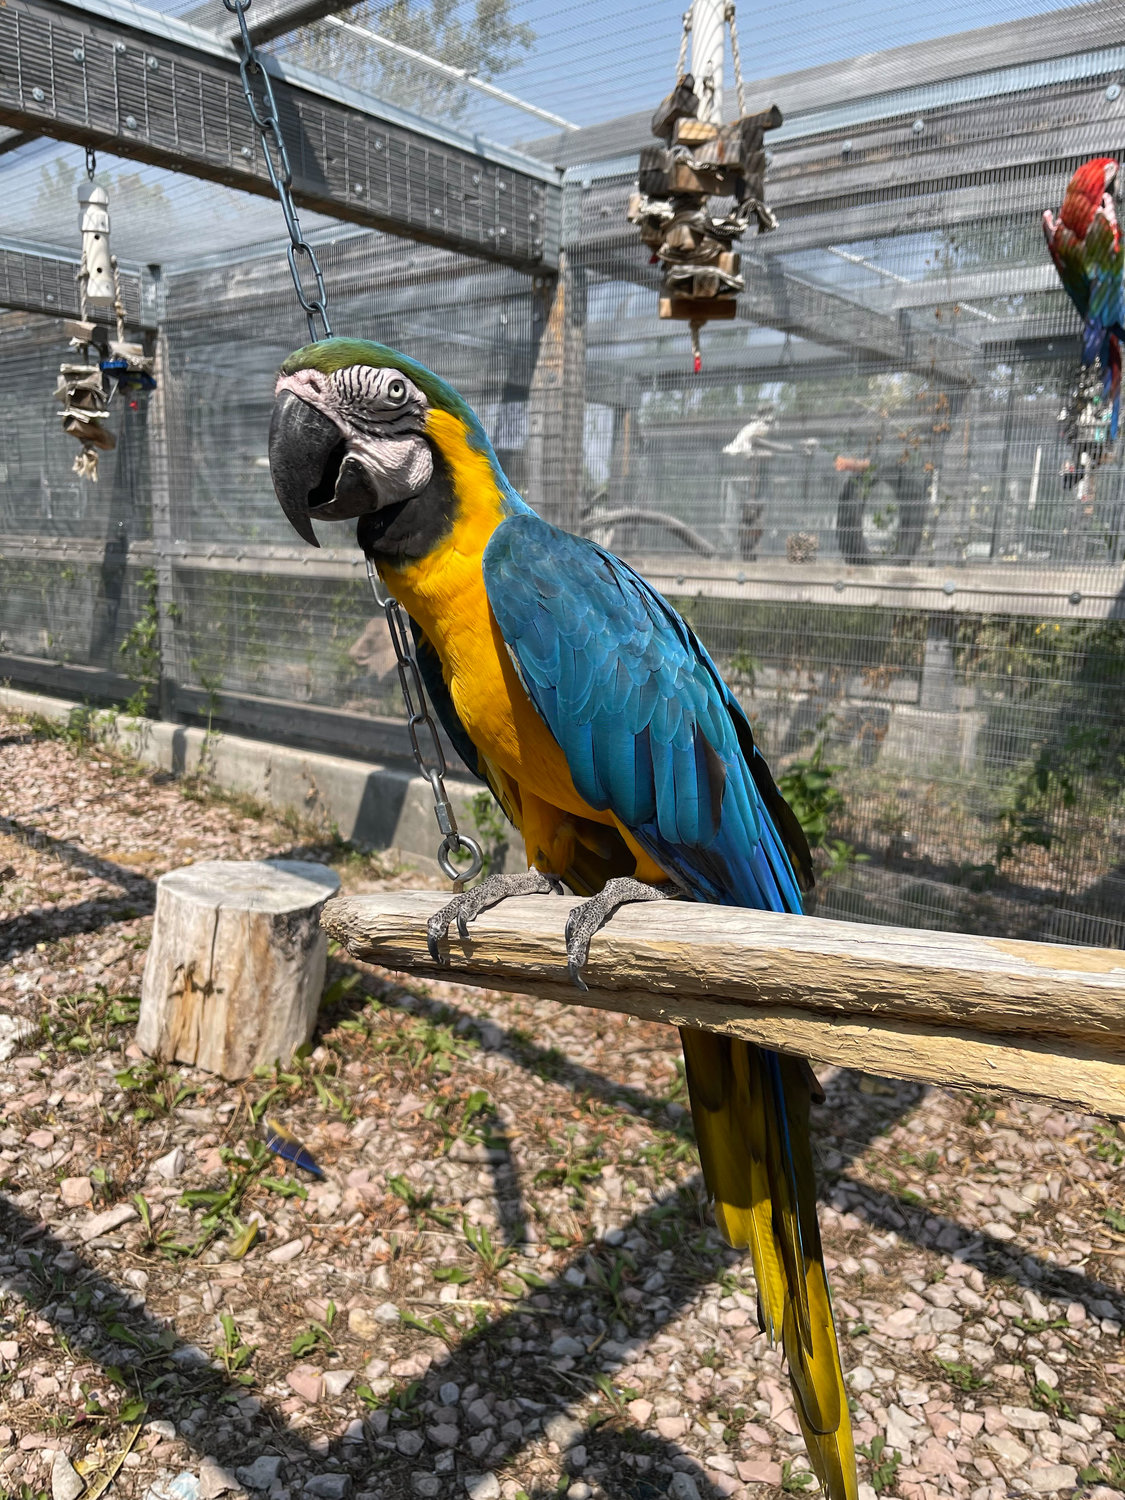 Though the parrots have smaller individual or paired enclosures, many are given ample time in larger, group enclosures for enrichment.